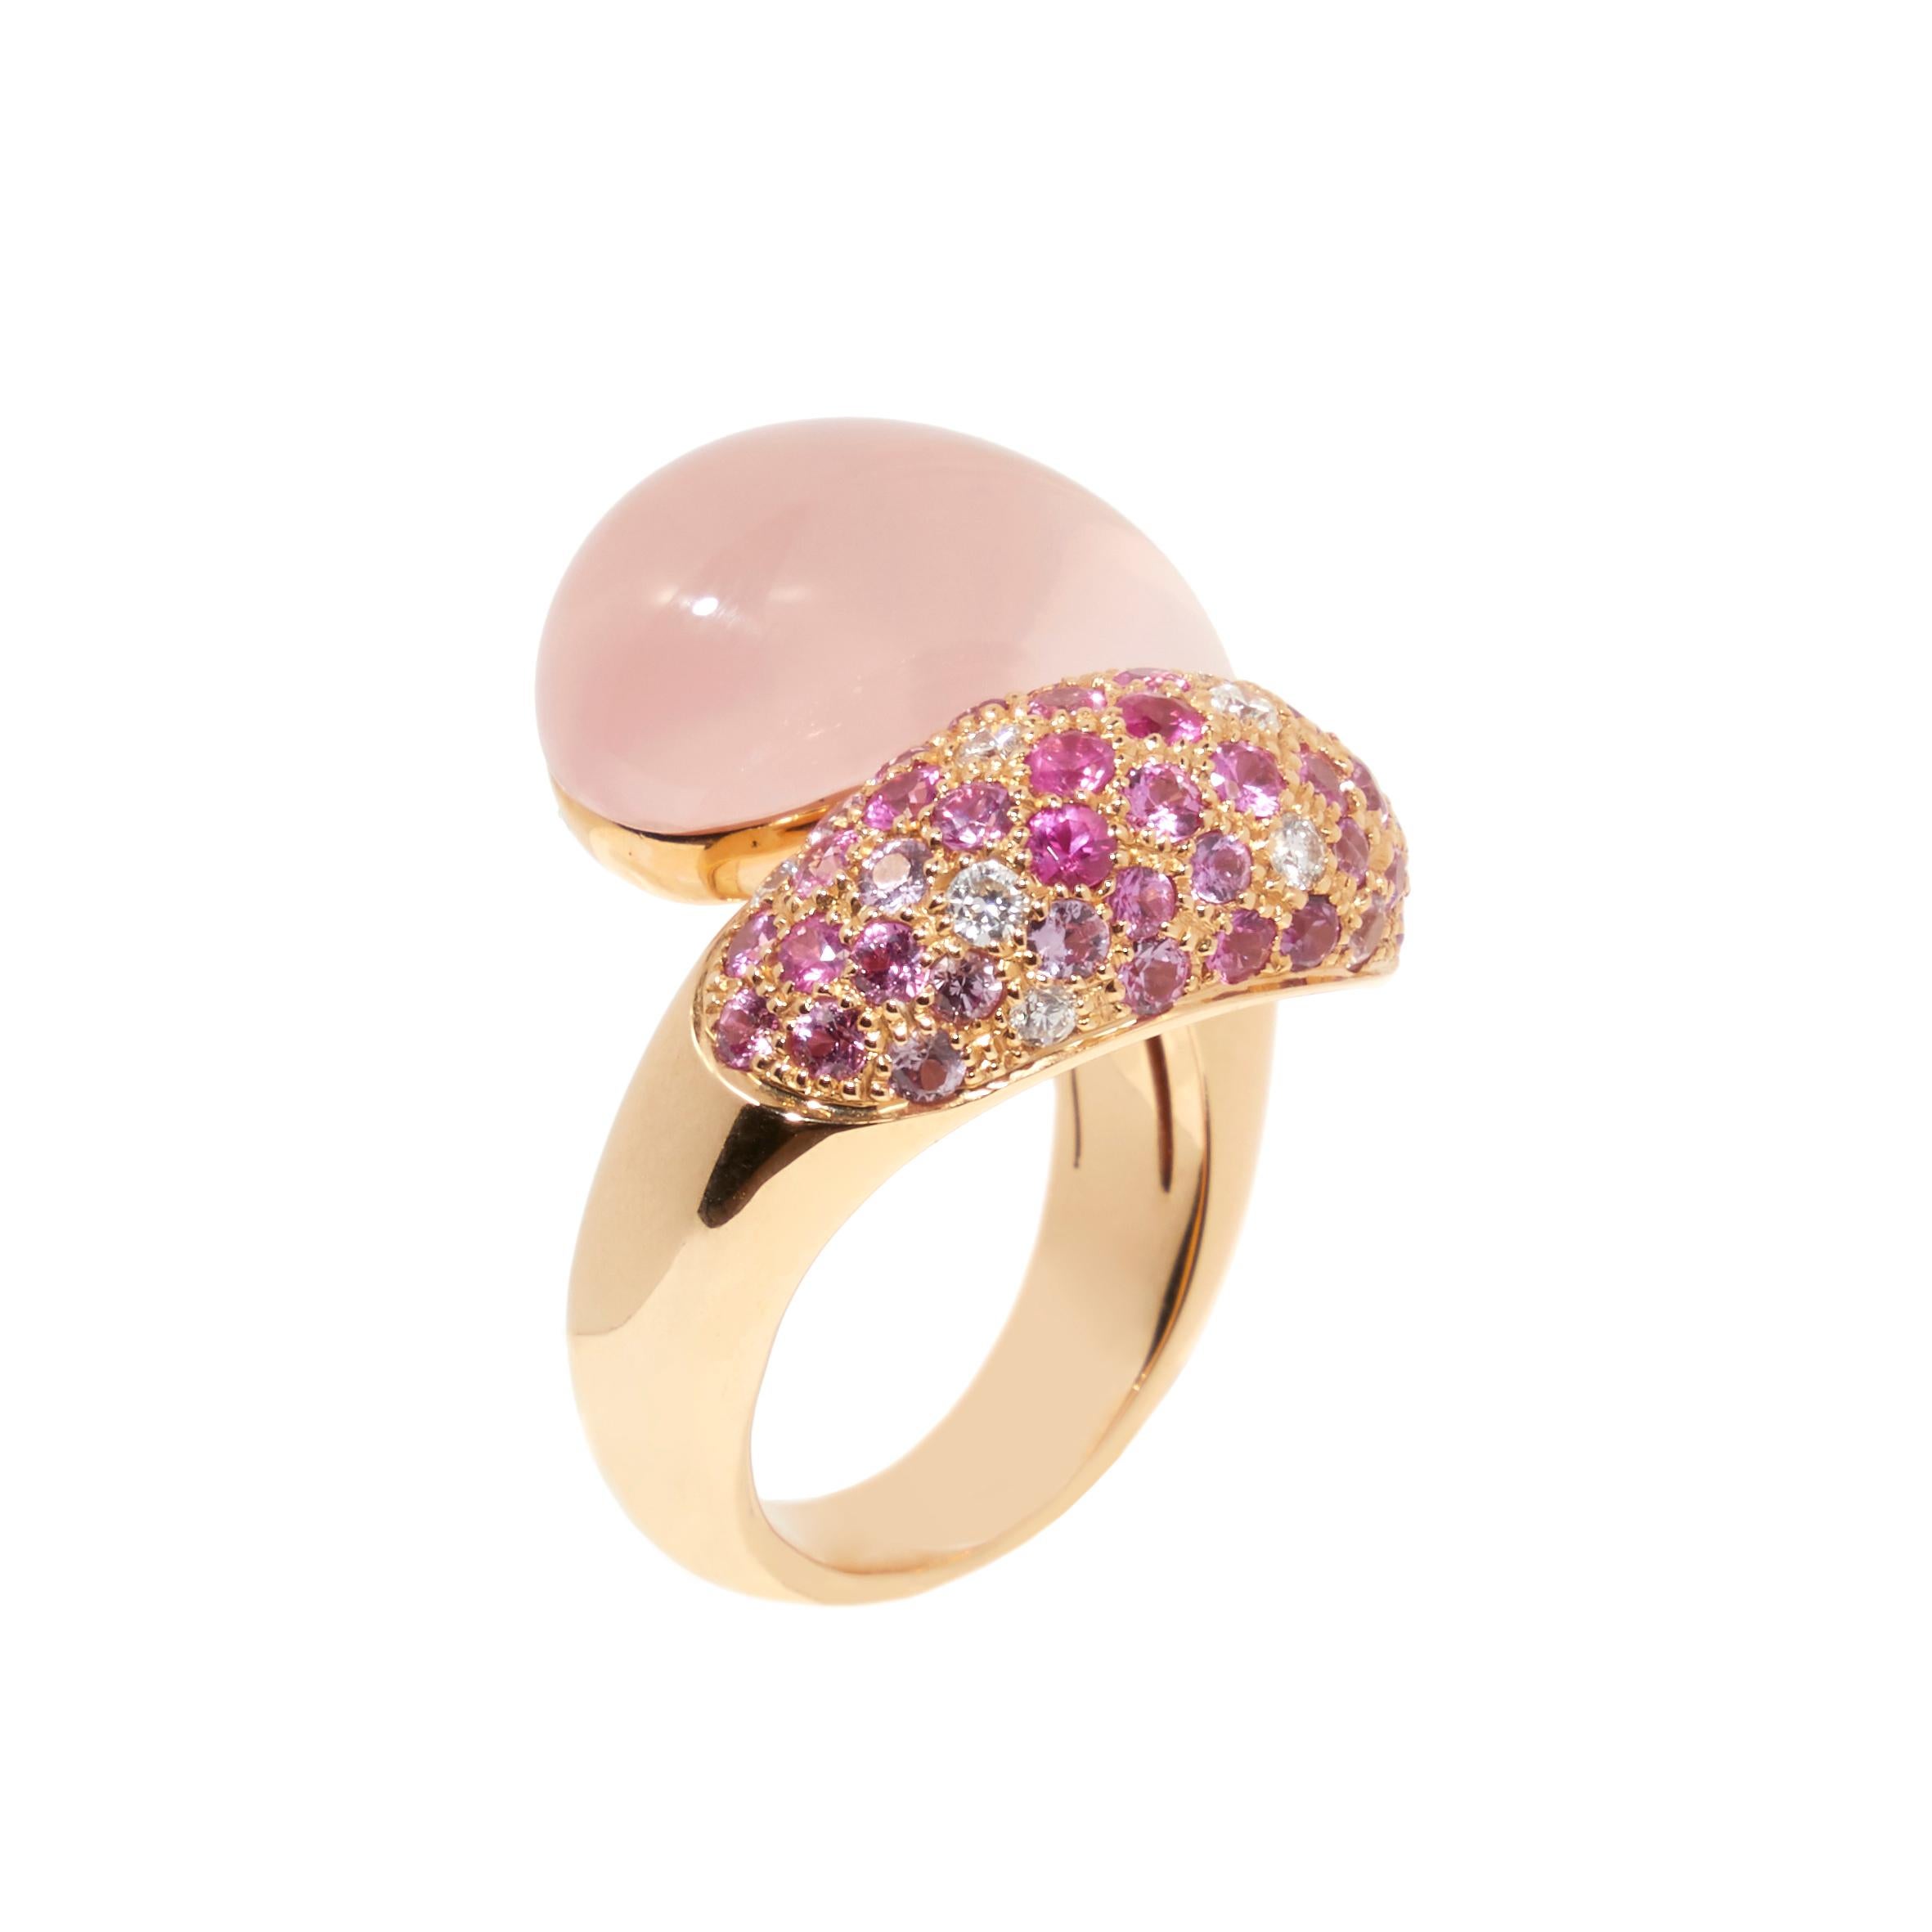 One-of-a-kind Design in Pink Gold with Rose Quartz, Diamonds, and Pink Sapphires

The ring crafted in 18 karat pink gold features a unique design known as ‘wokkel’ in Dutch. The rose quartz gemstone is sculpted into a rounded shape that complements